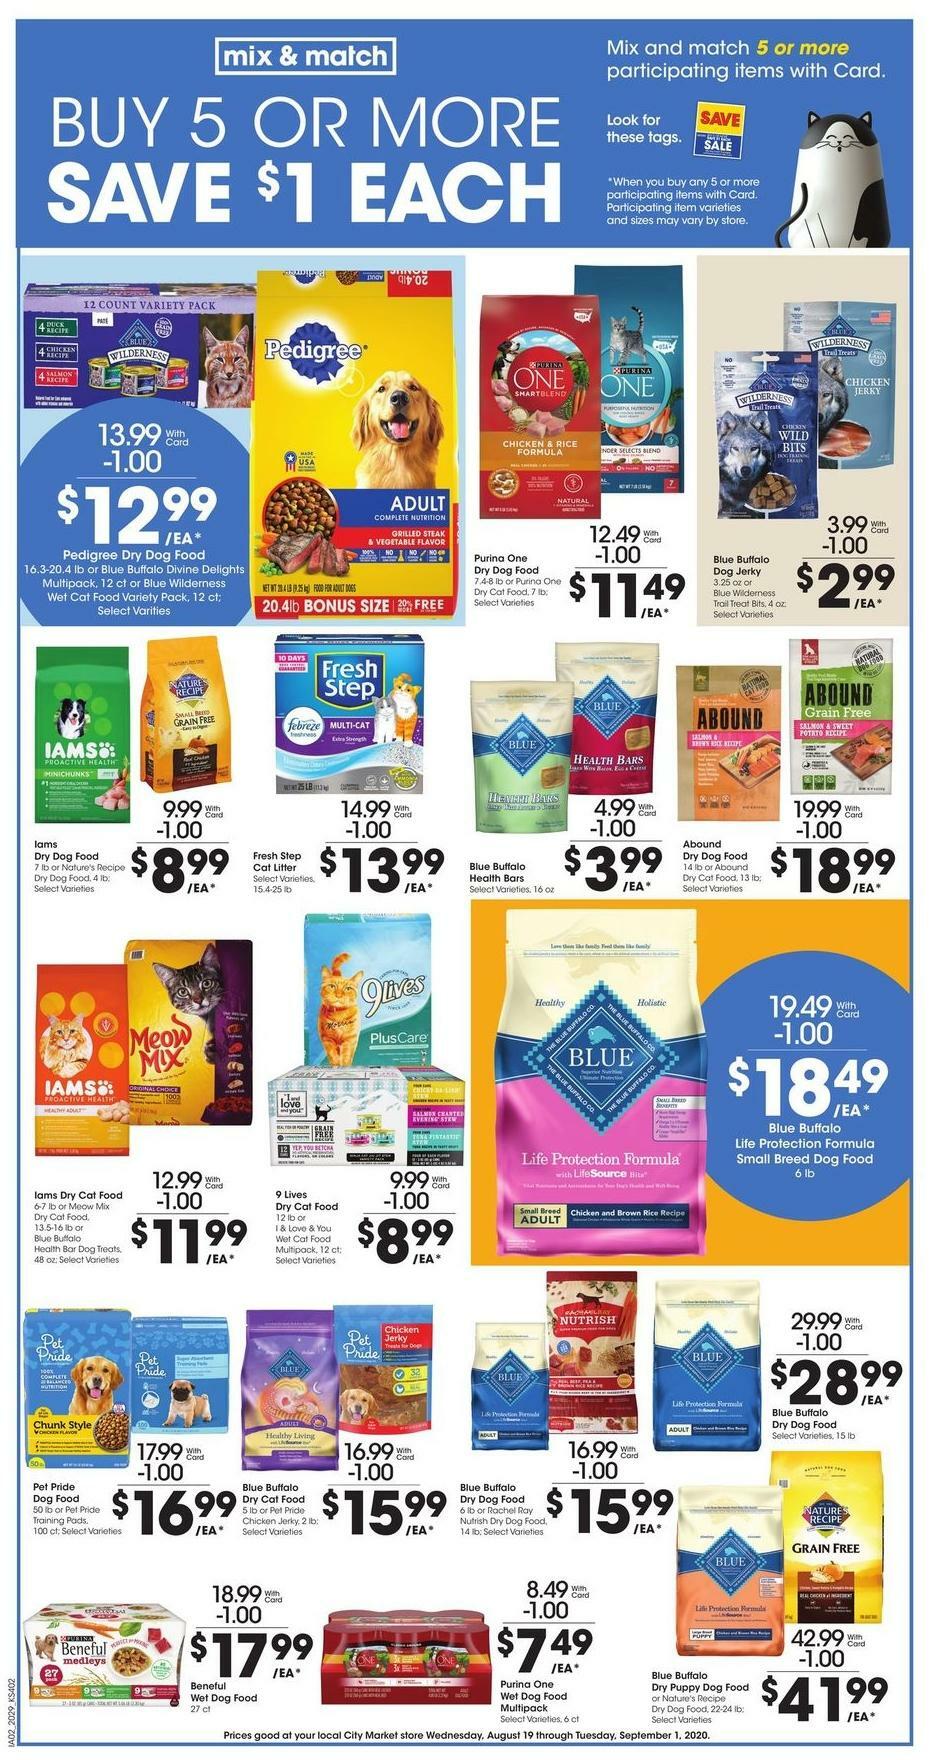 City Market Weekly Ad from August 19